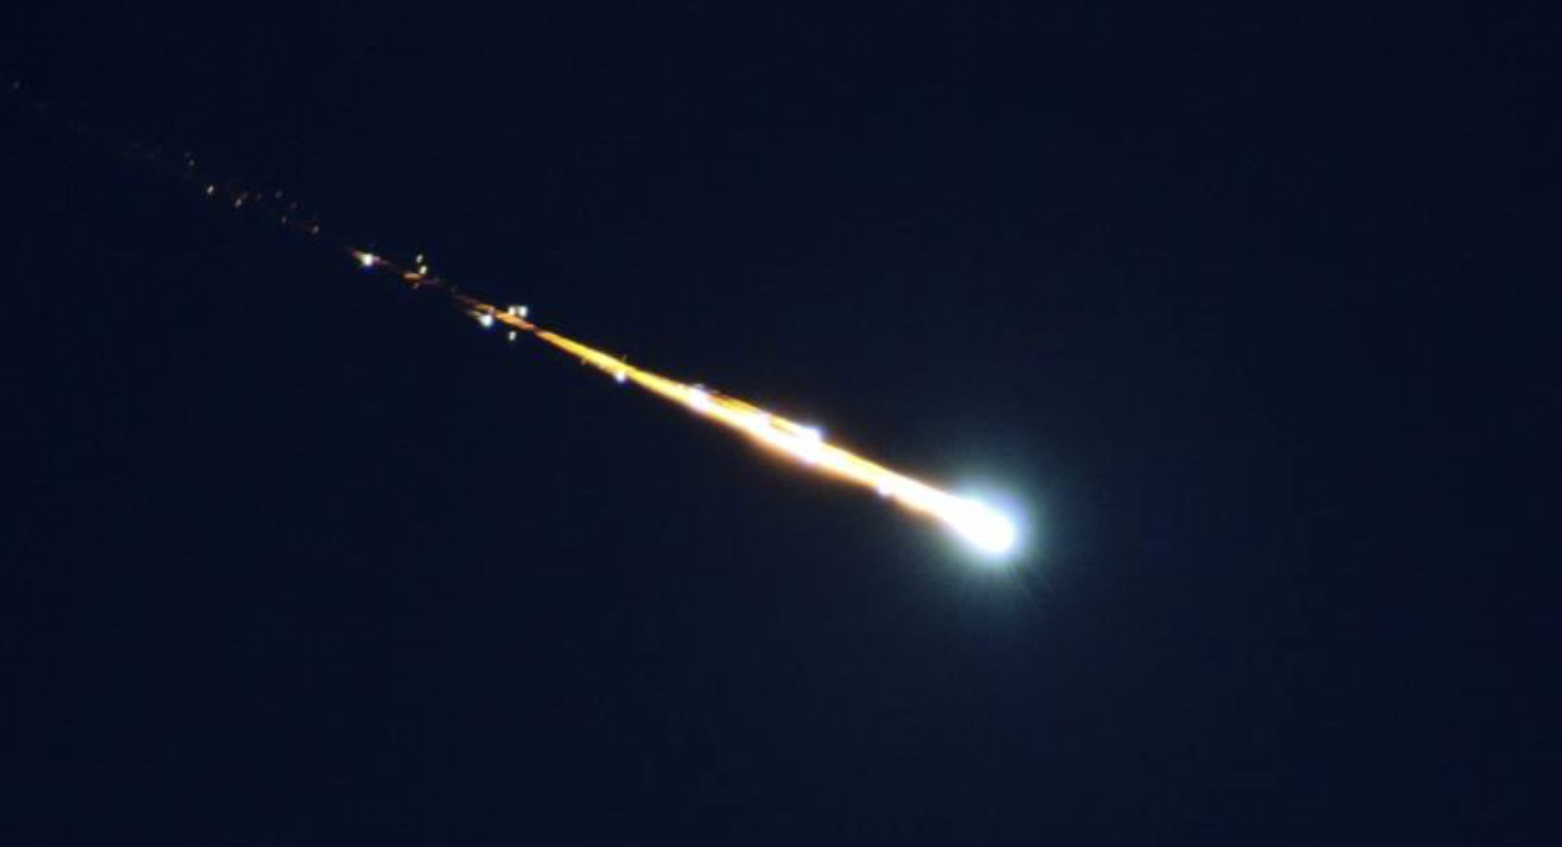 A fireball breaking apart in Earth's atmosphere.